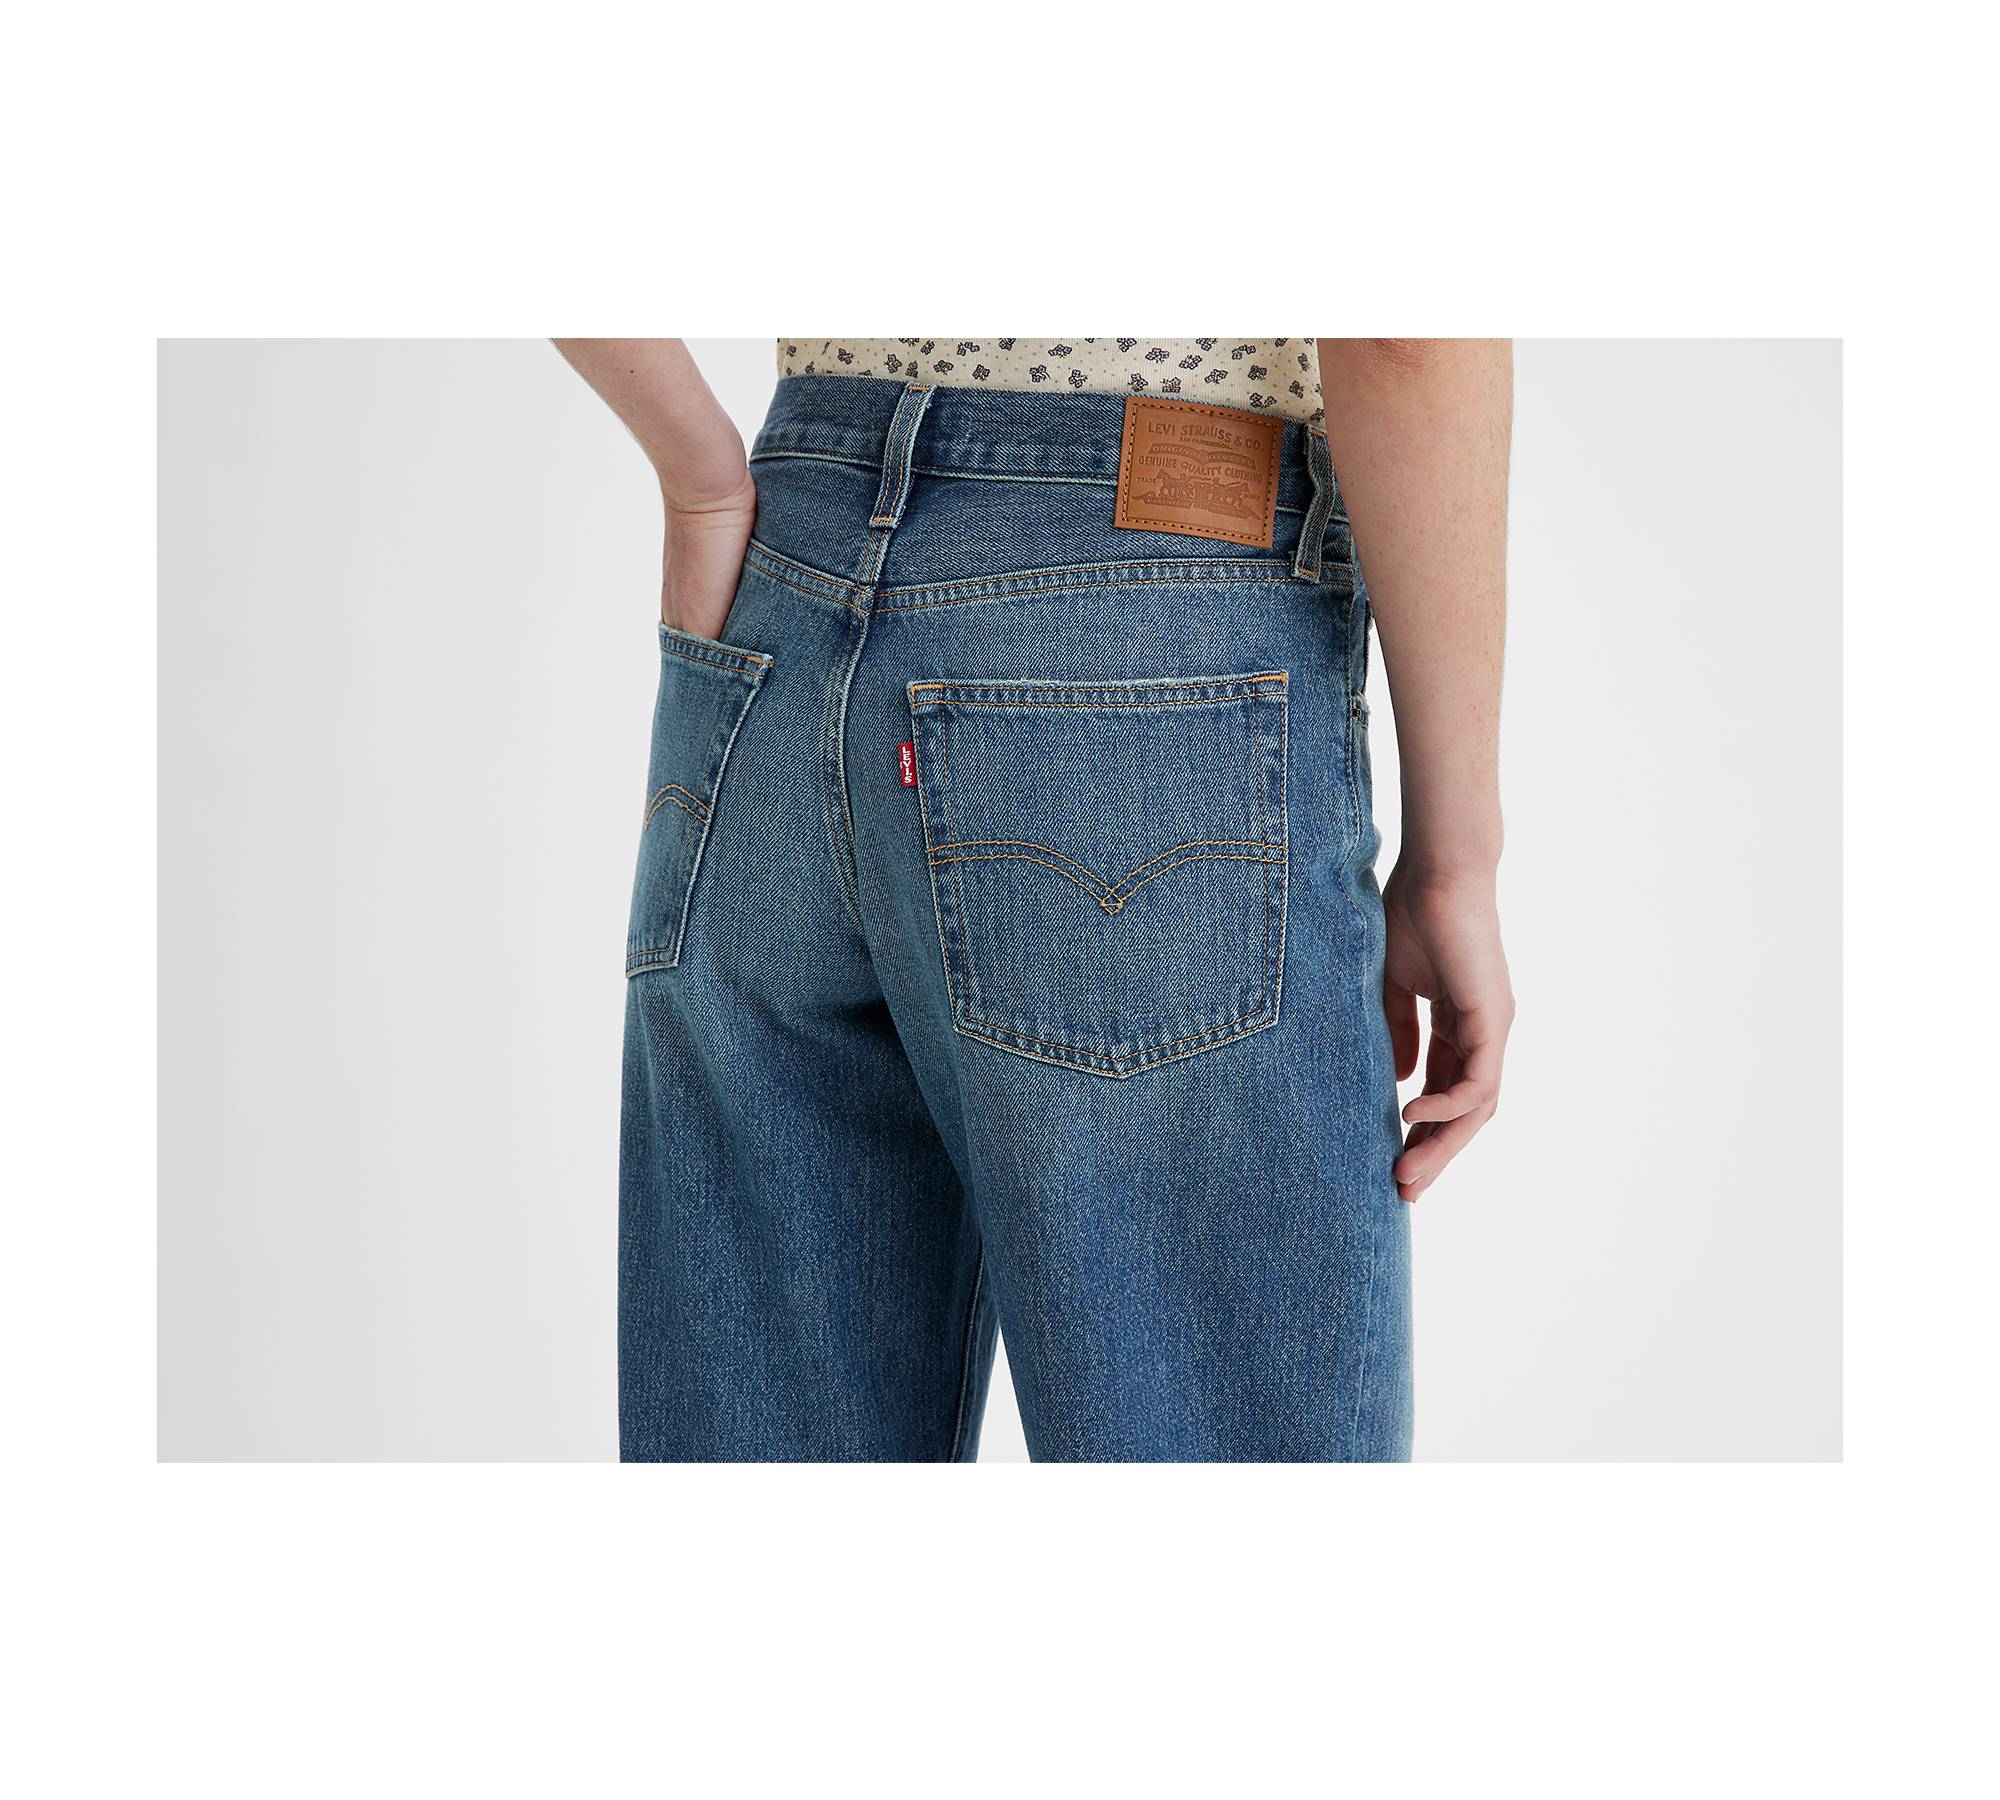 Pleated Baggy Dad Women's Jeans - Medium Wash